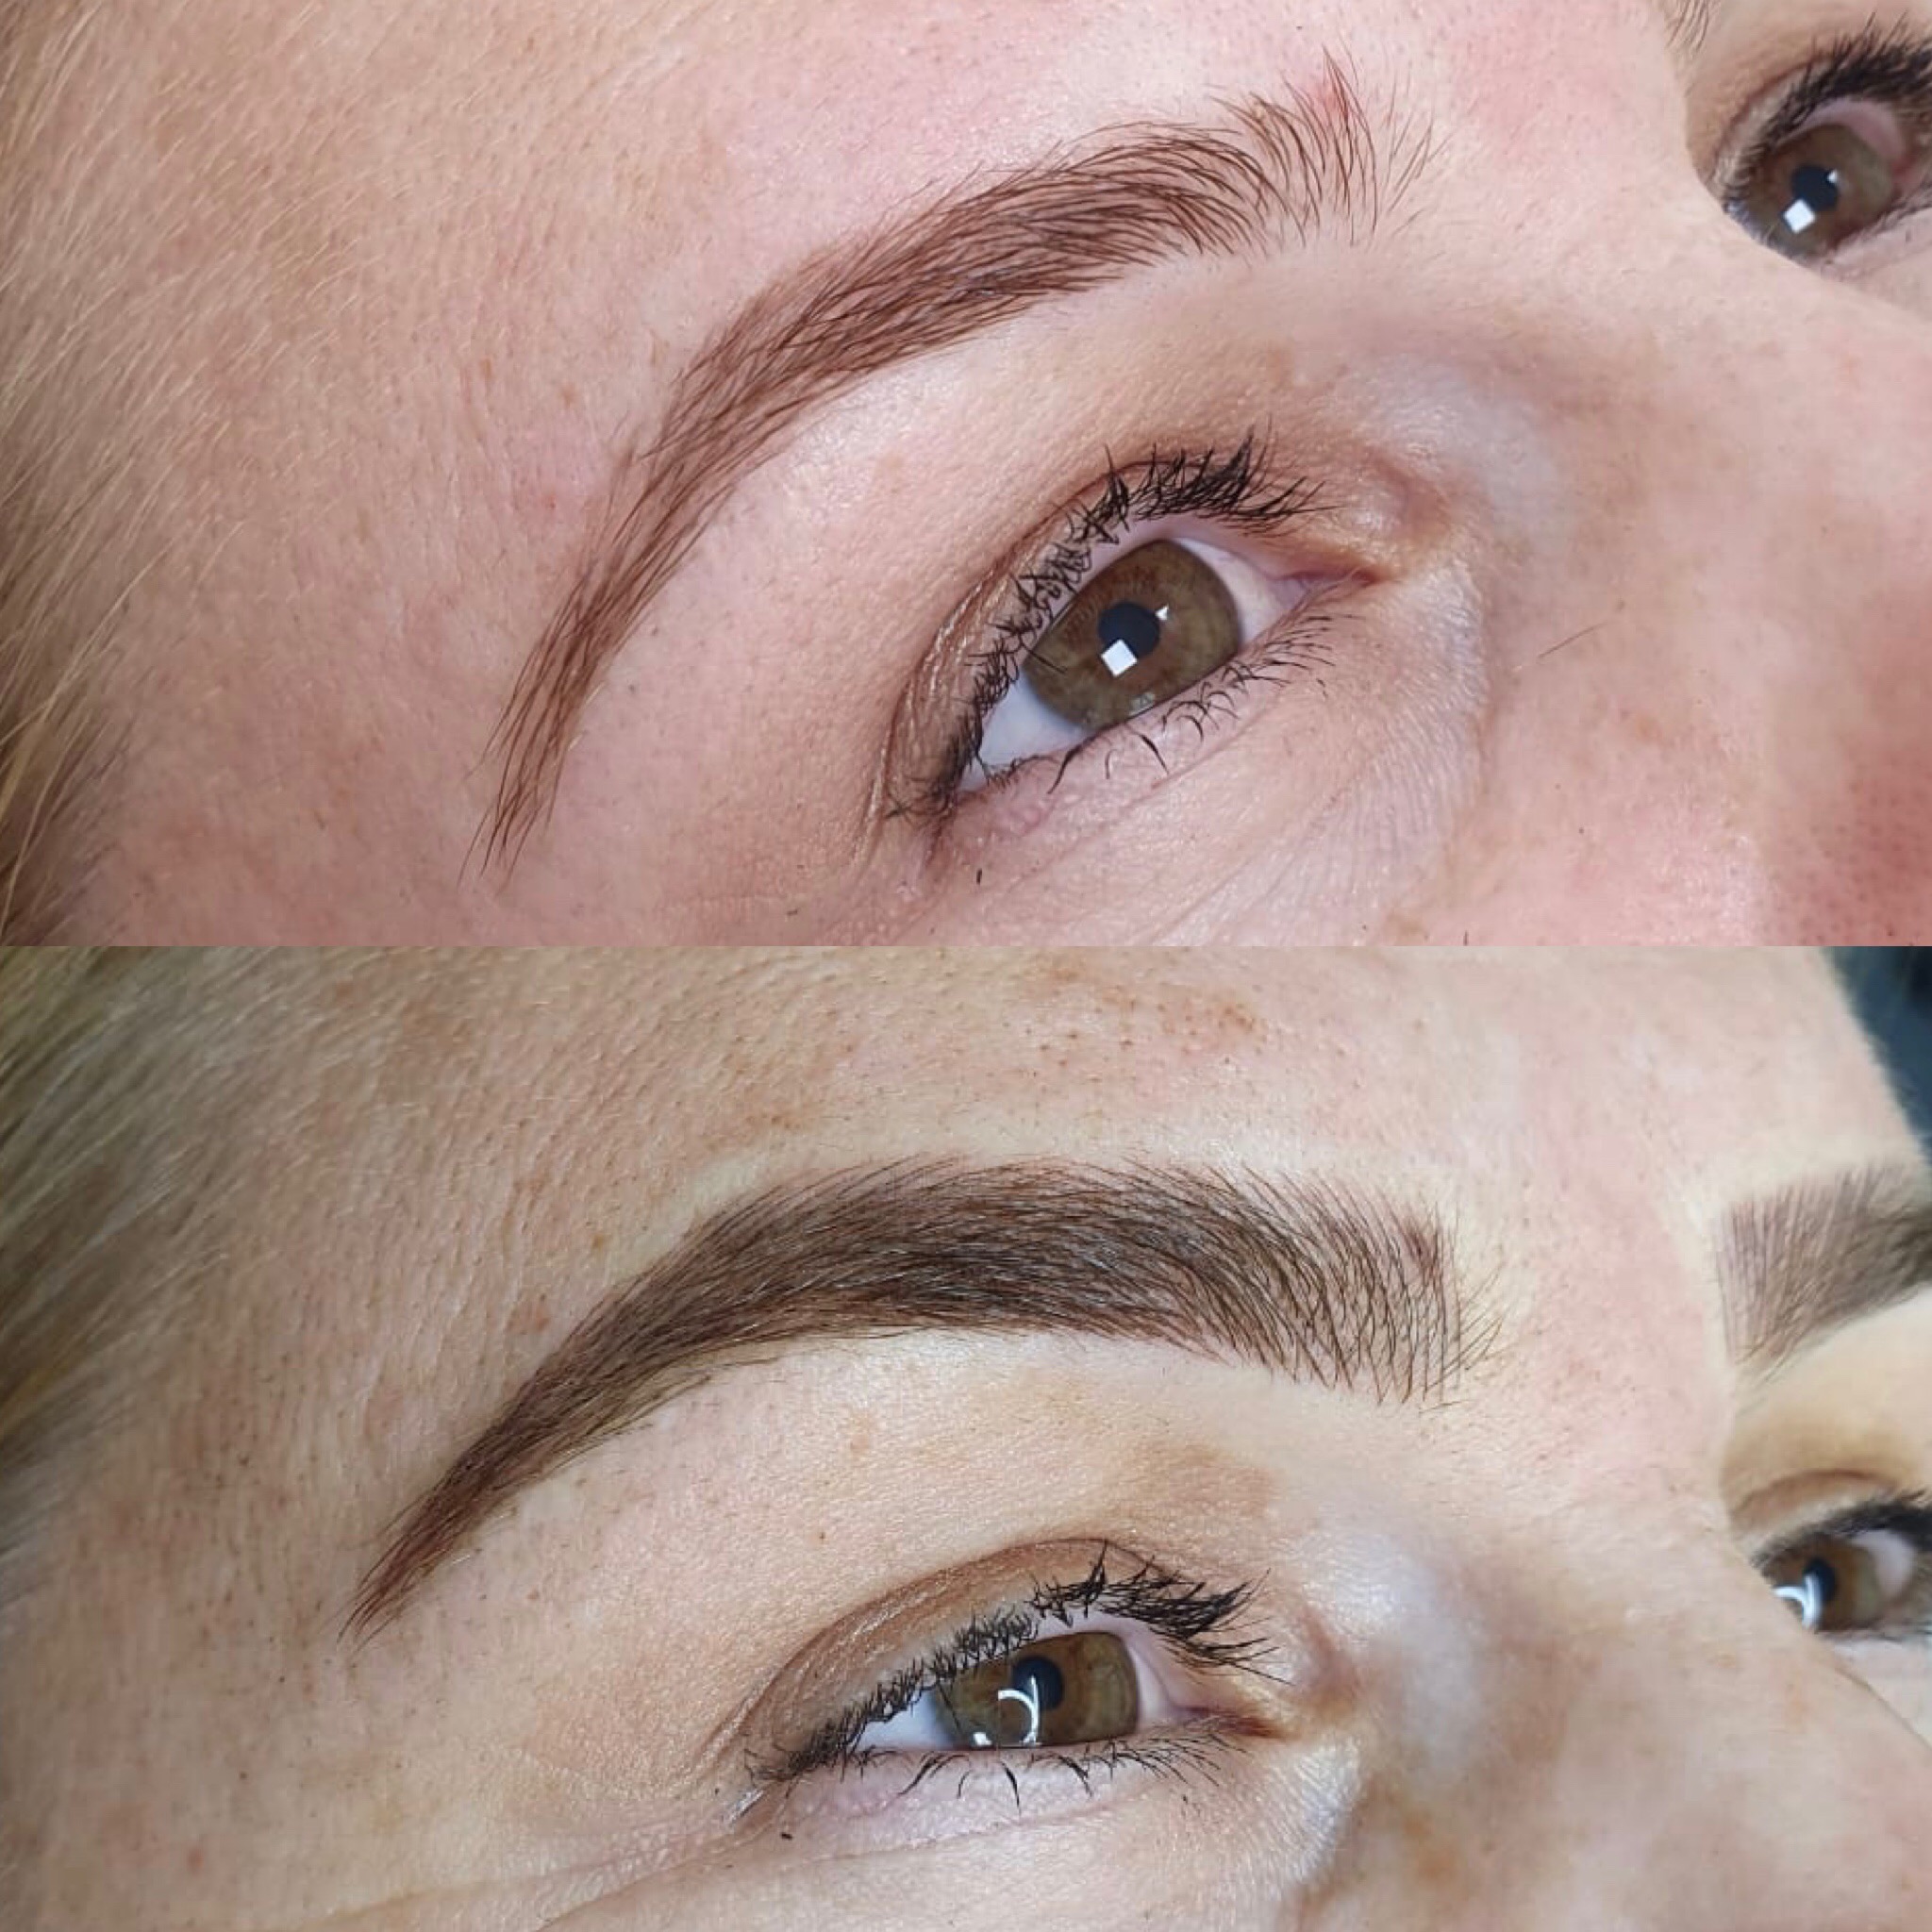 Image of a before and after eyebrow job.